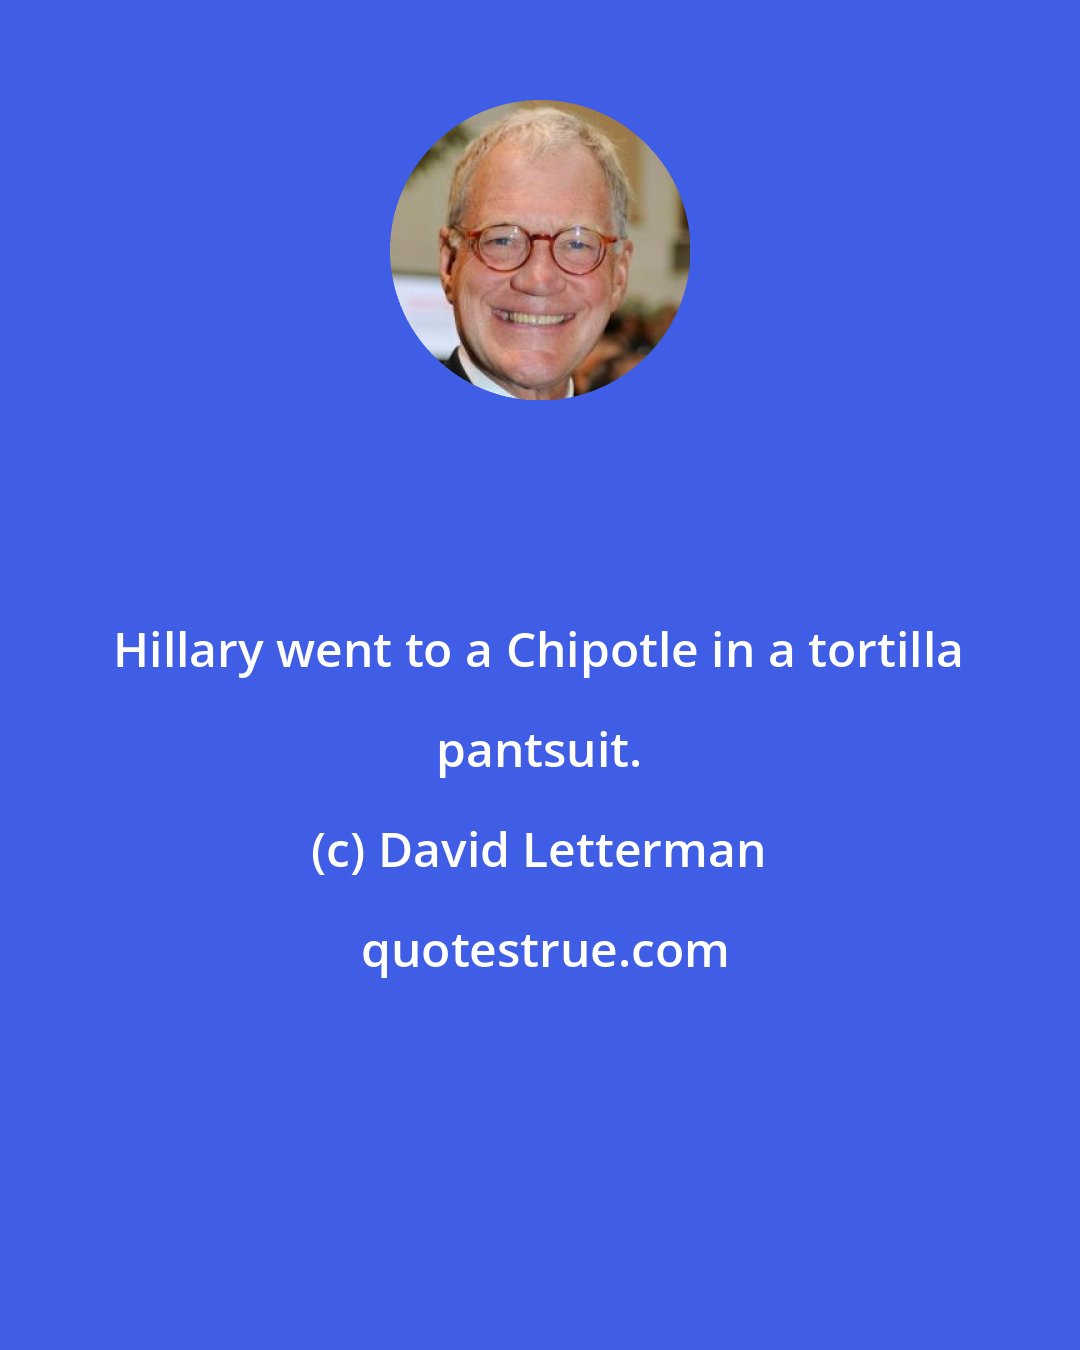 David Letterman: Hillary went to a Chipotle in a tortilla pantsuit.